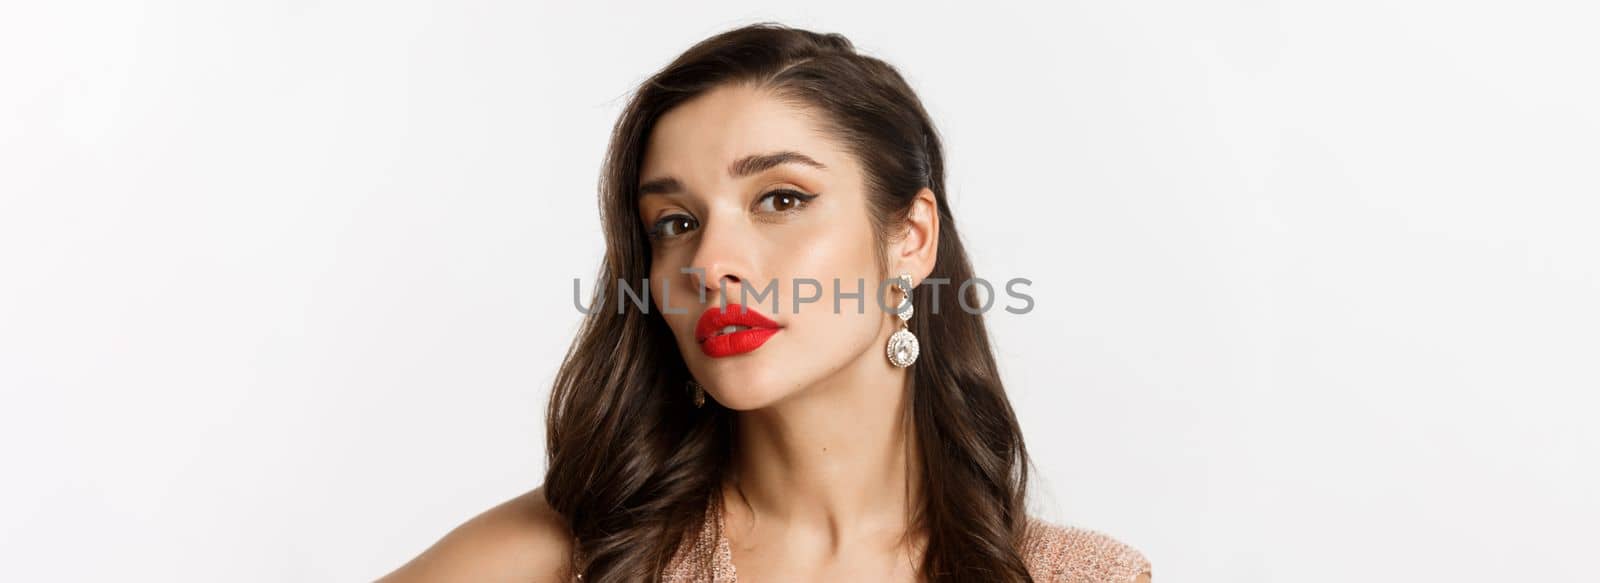 Concept of New Year celebration and winter holidays. Close-up of sensual and beautiful woman with red lips, looking confident at camera, wearing luxury earrings, white background.